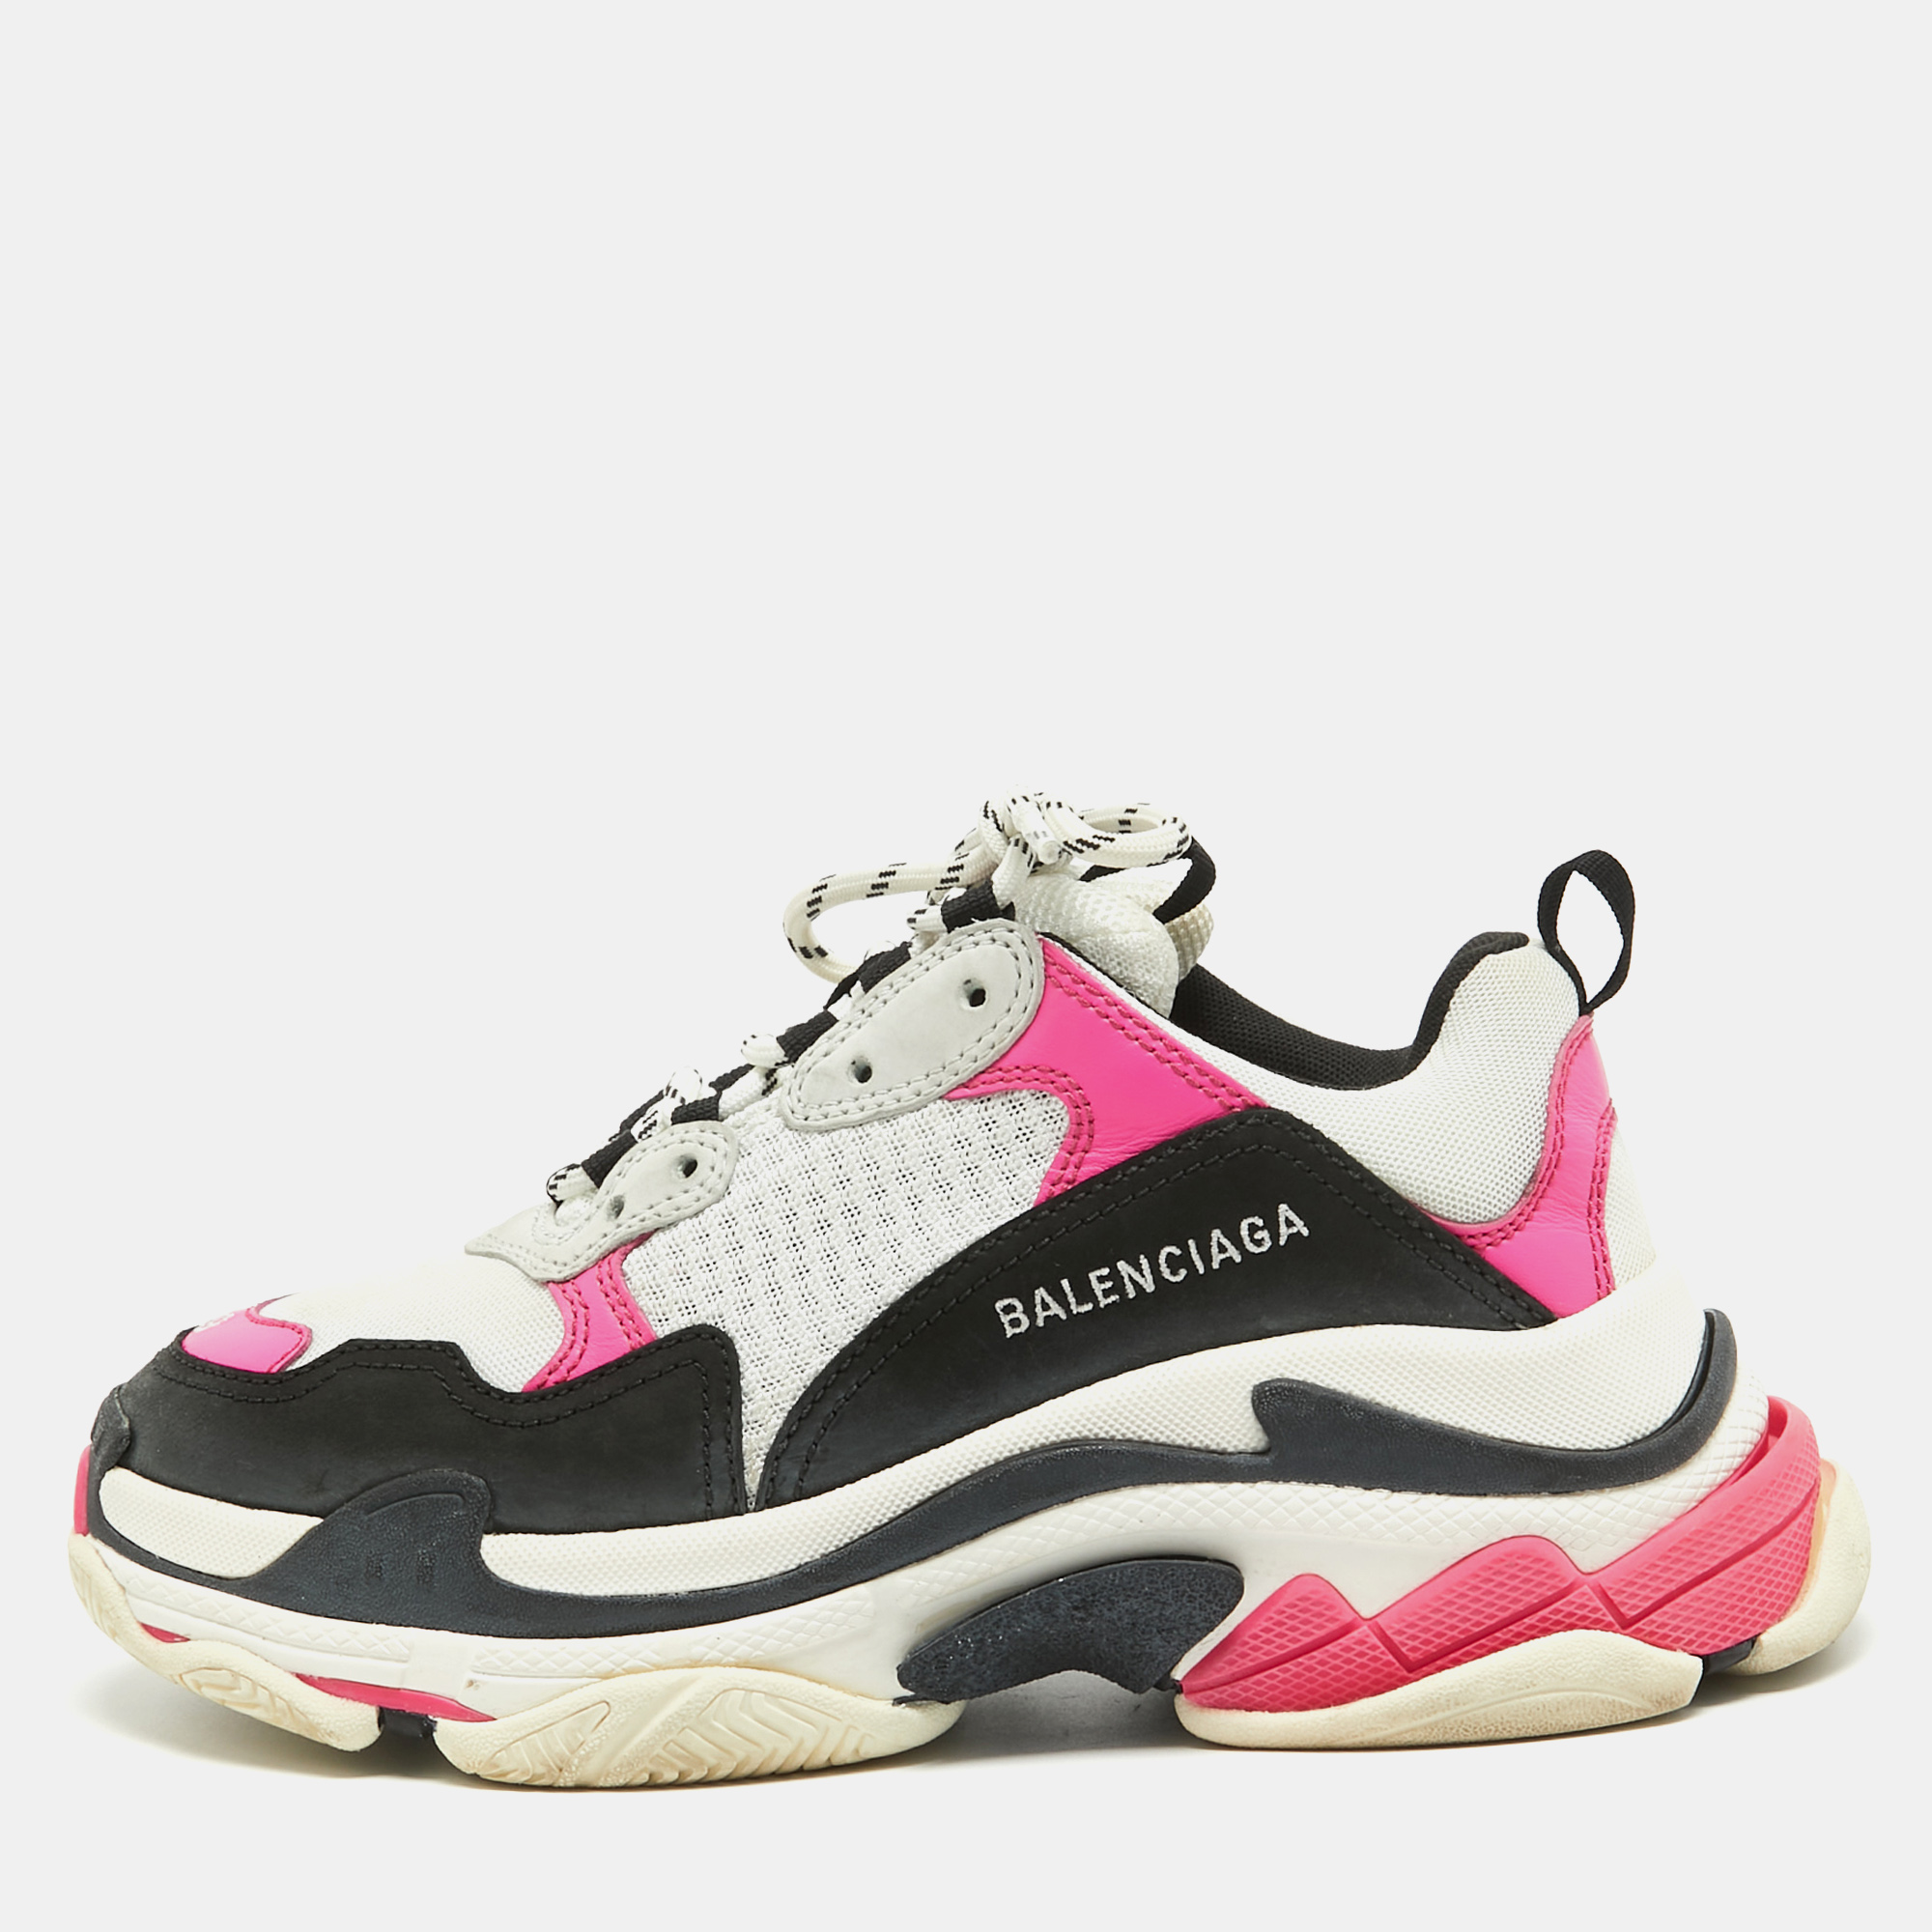 Step into fashion forward luxury with these Balenciaga sneakers. These premium kicks offer a harmonious blend of style and comfort perfect for those who demand sophistication in every step.